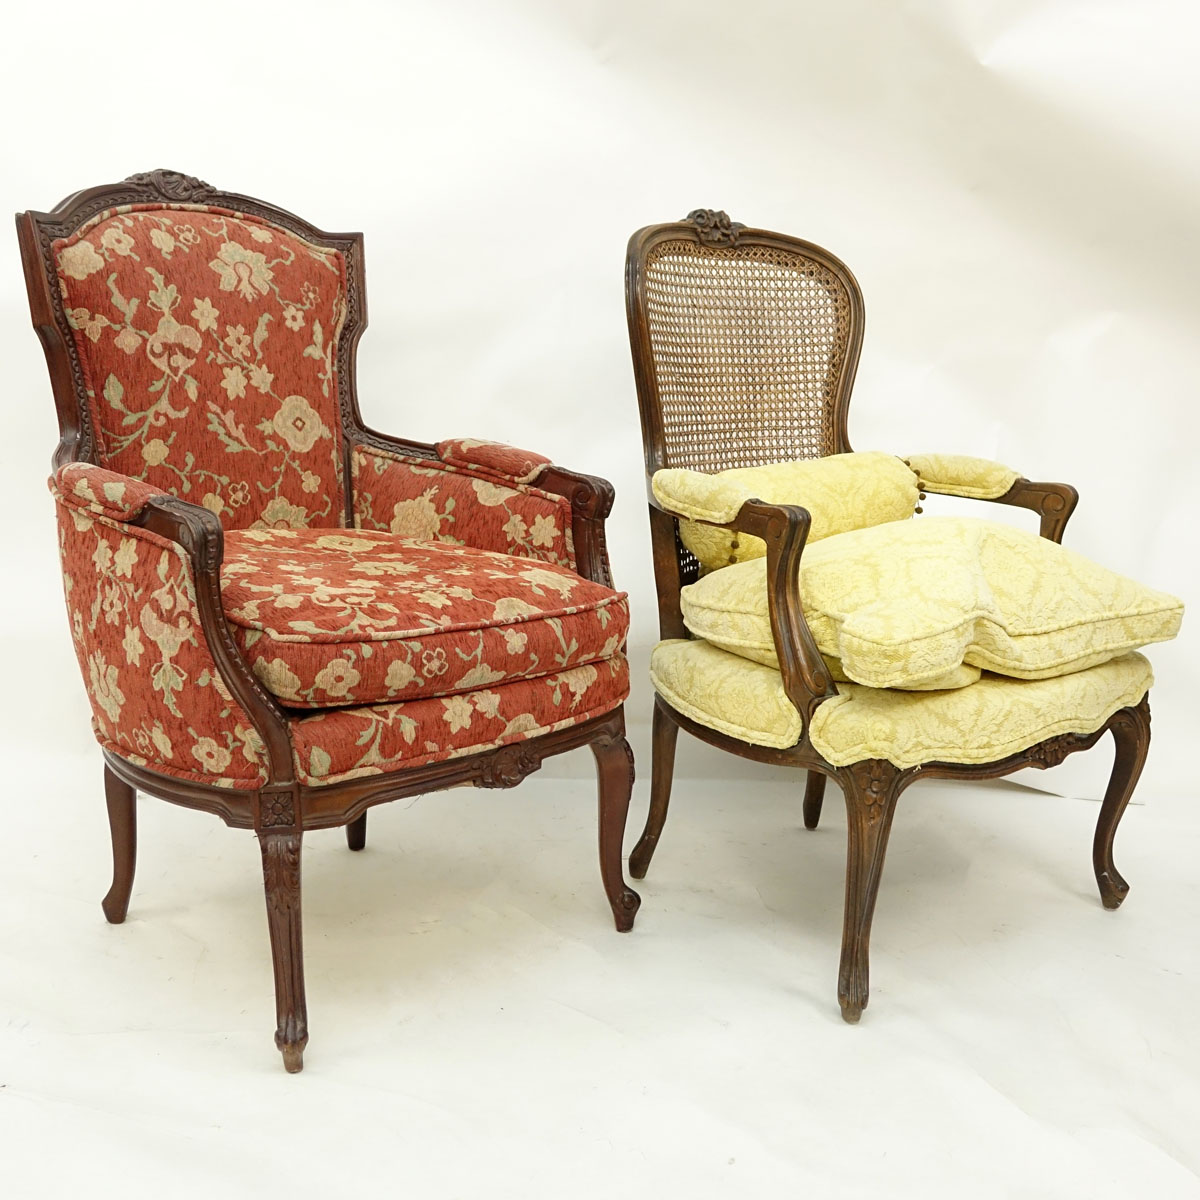 Two (2) 20th Century French Carved Louis XV style Chairs, Fauteuil with Cane Back and Bergere. Unsigned.